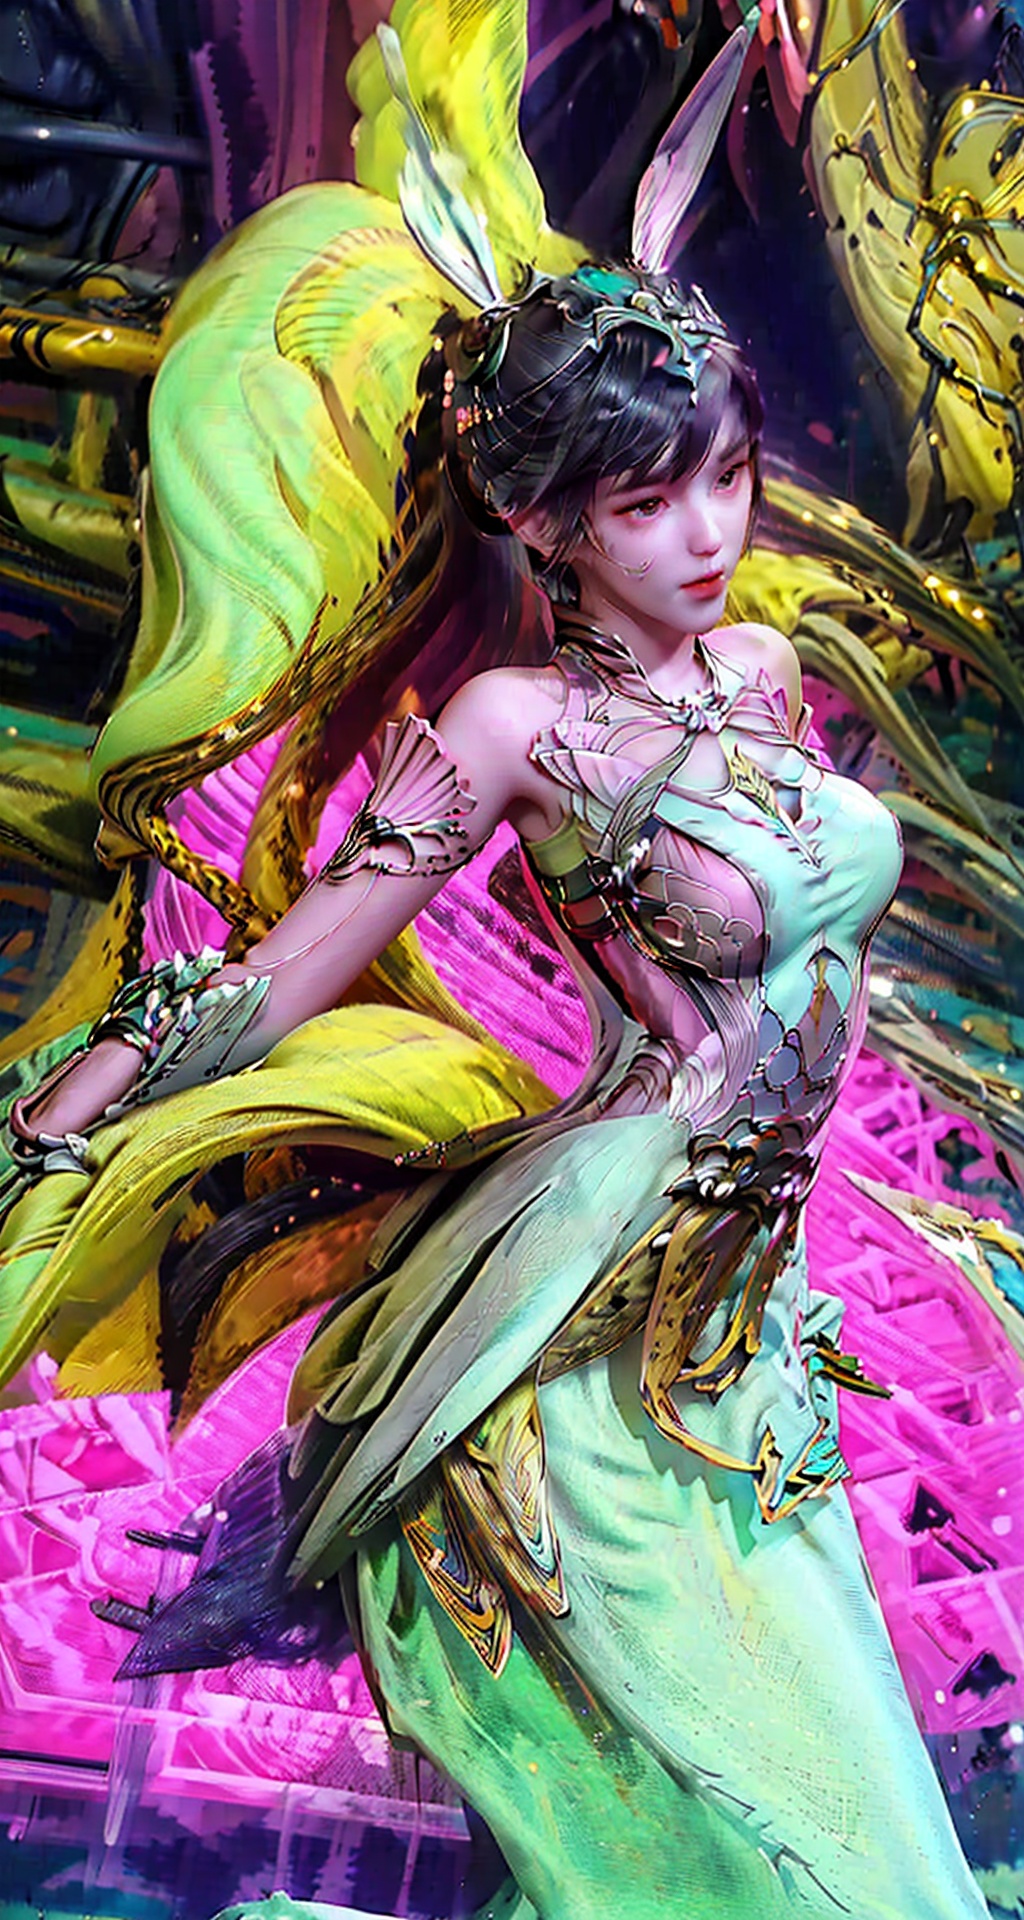 dark theme,zhongfenghua, (1girl:1.2), (masterpiece,top quality,best quality,official art,beautiful and aesthetic:1.2), (geometric abstract background:1.4), esoteric,depth of field(zentangle, mandala, tangle, entangle), (colorful:1.1), (floating colorful sparkles), (dynamic pose), (dynamic angle:1.4), glowing skin,elegant, a brutalist designed, vivid colours, romantici**, Samoan pond, Fluid Moving well-built girl, Fall, expressive brush strokes, Swirling,yuyao,1 girl,gonggongshi,dress,shuishen,baiguangying,wedding dress,cyborg,hf_xy,hand101,Pink Mecha